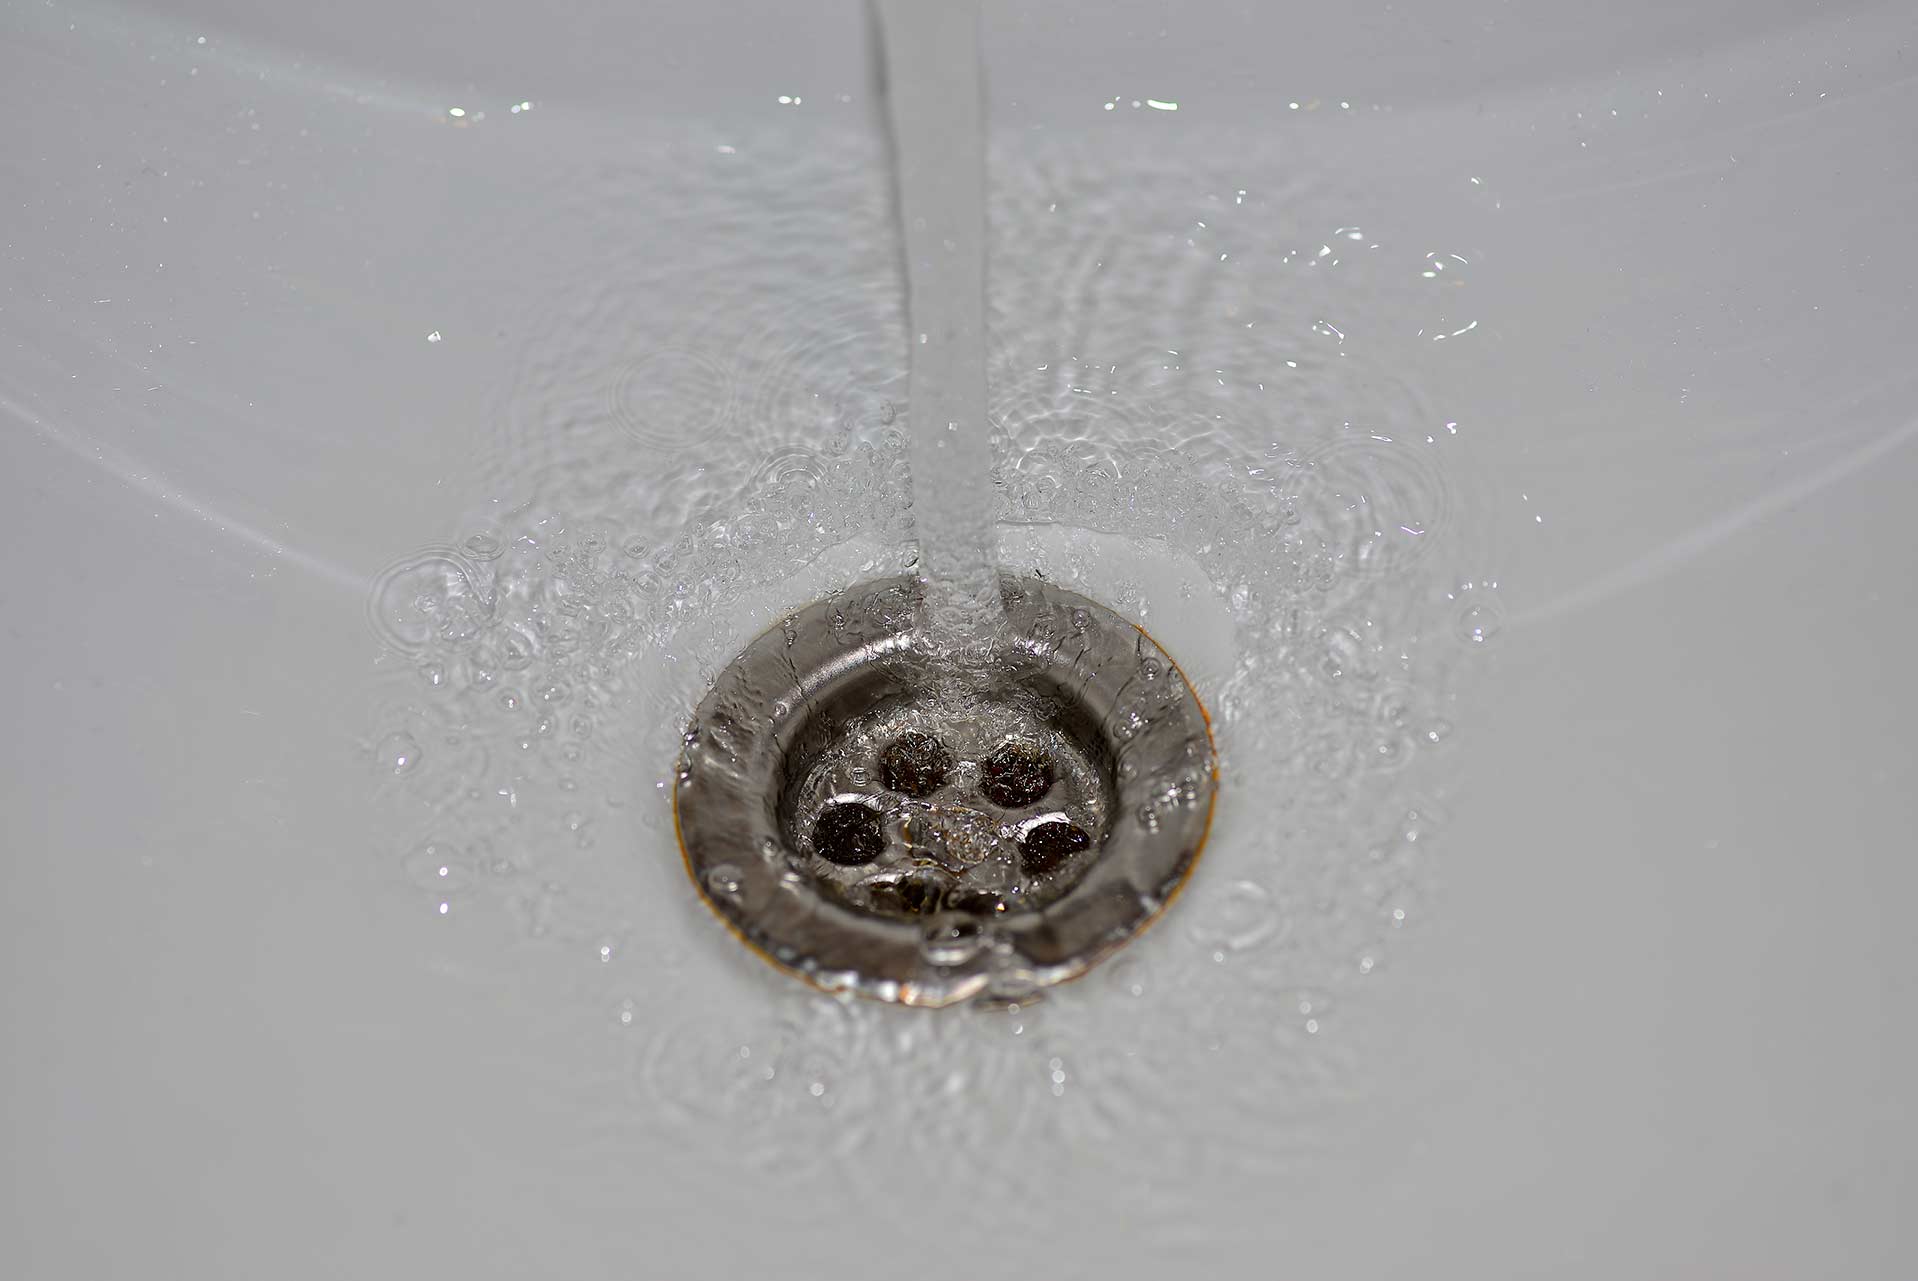 A2B Drains provides services to unblock blocked sinks and drains for properties in Halesowen.